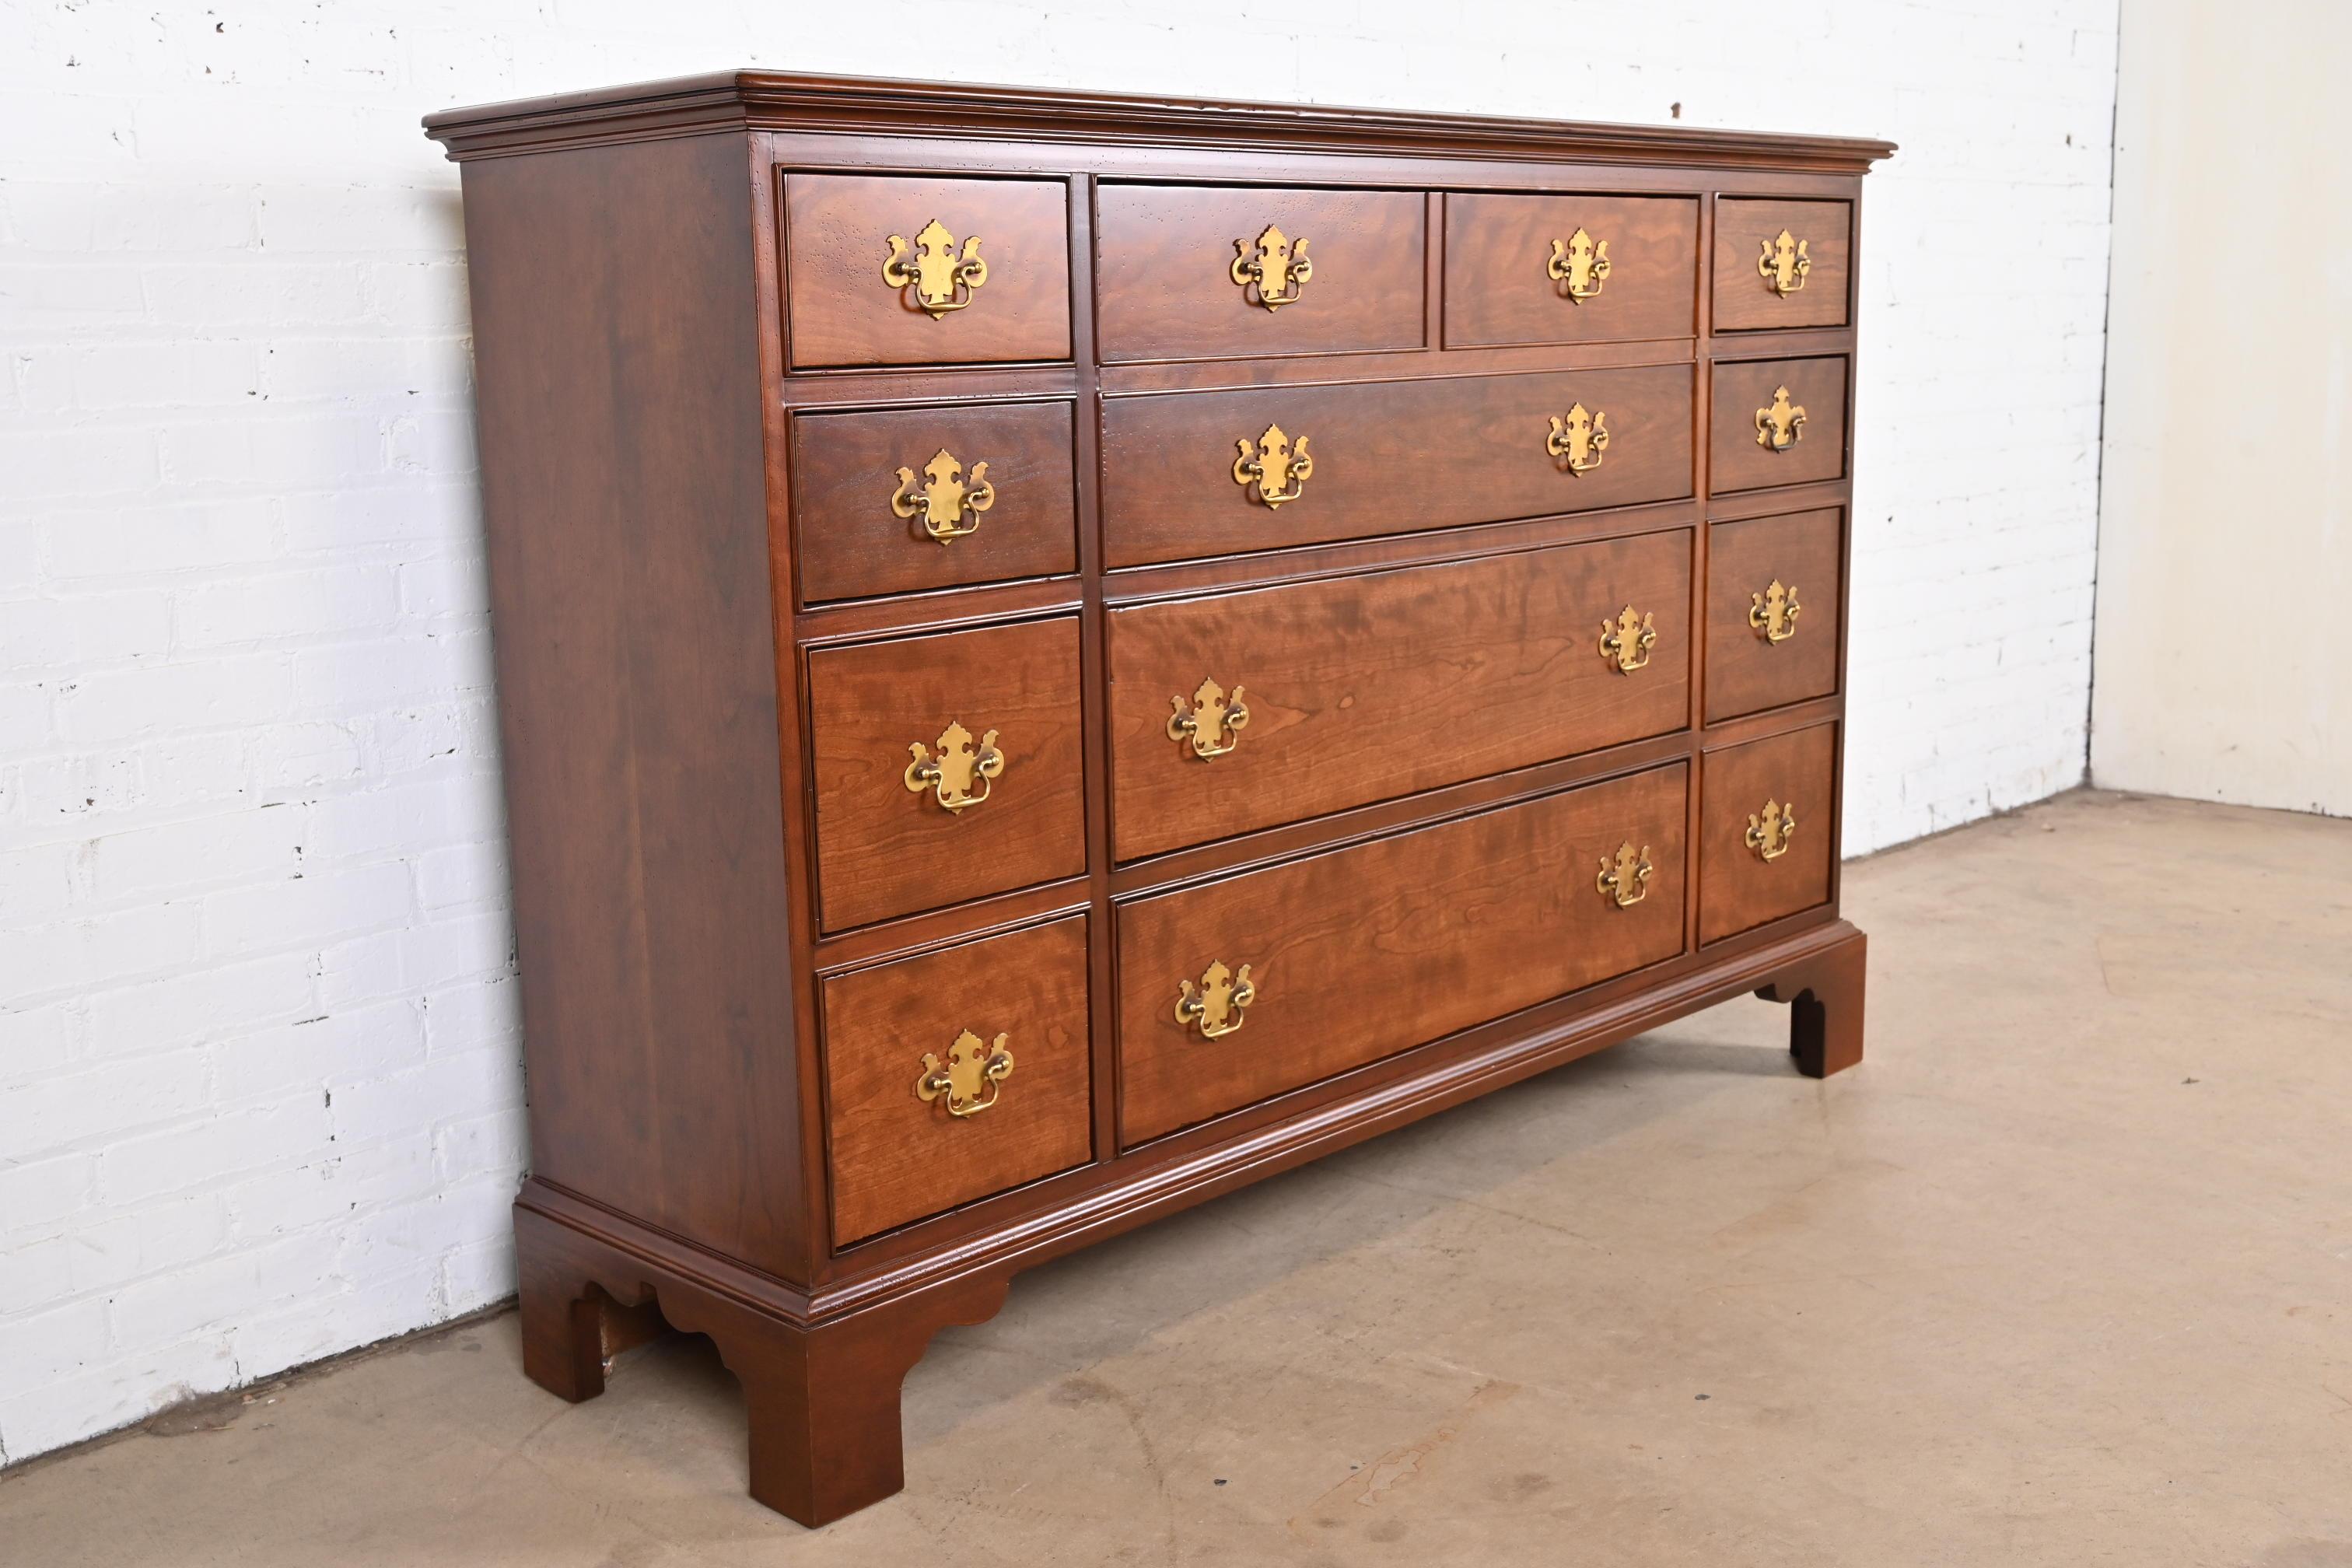 Brass Baker Furniture Georgian Cherry Chest of Drawers with Secretary Desk, Refinished